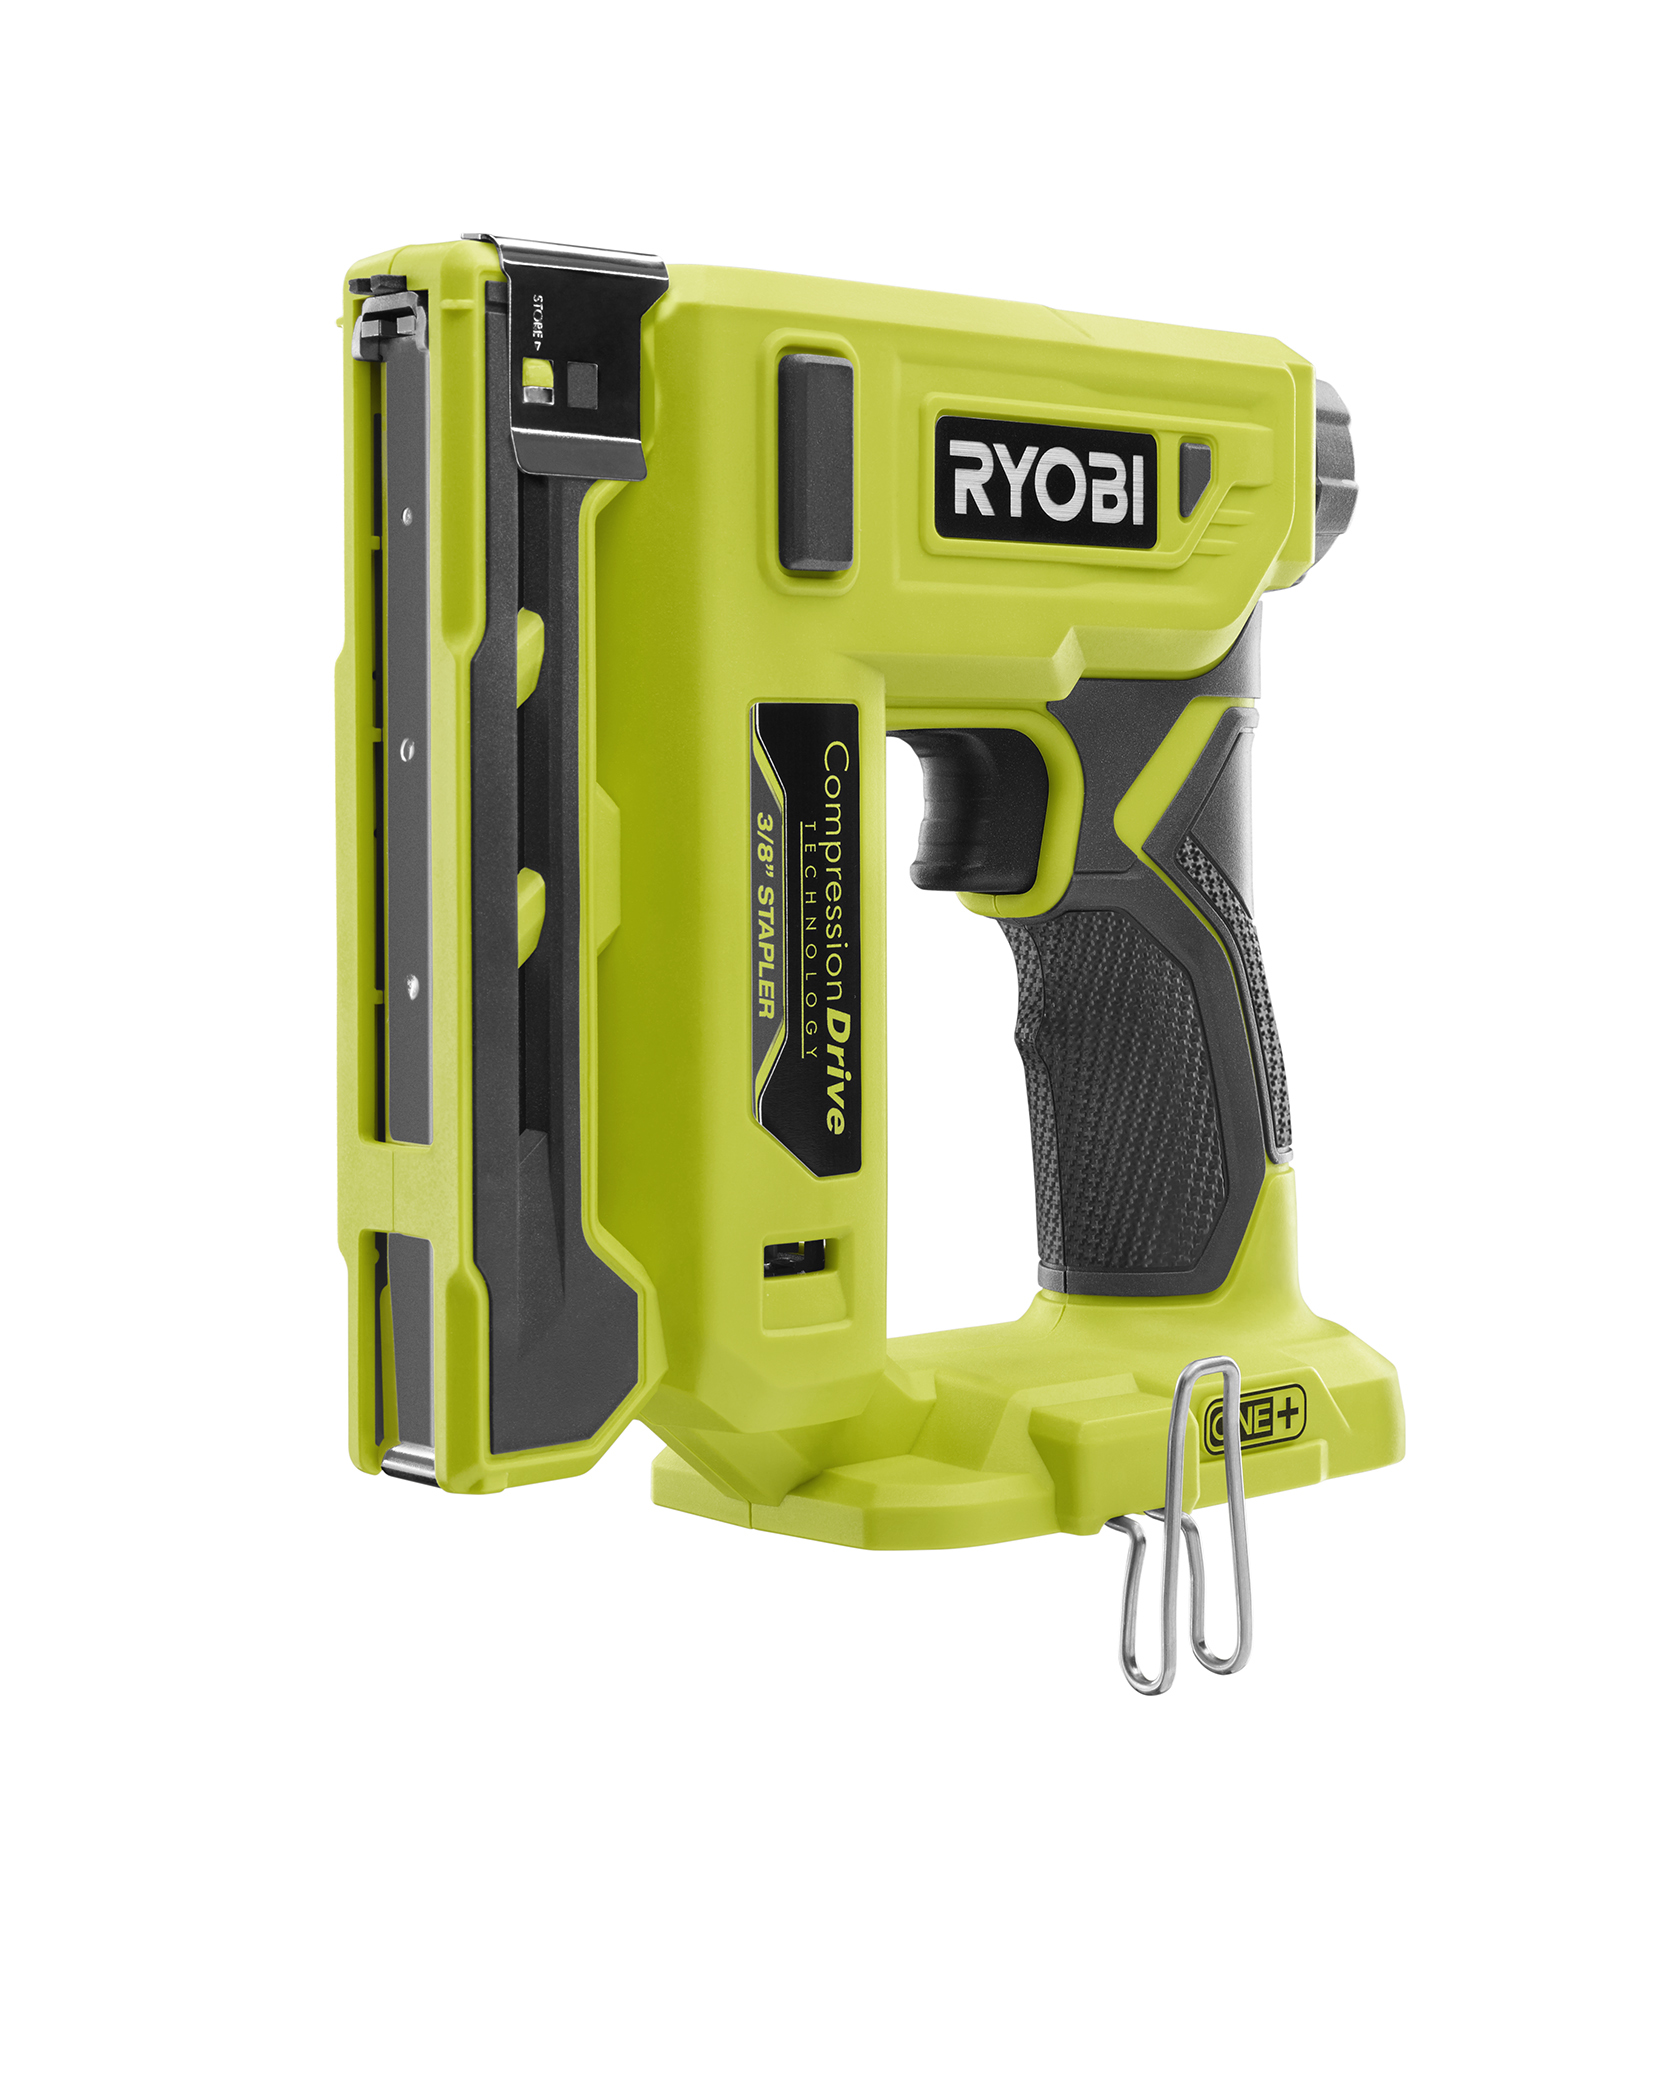 RYOBI 18V ONE+ AirStrike 16-Gauge Cordless Straight Nailer (Tool-Only) |  The Home Depot Canada